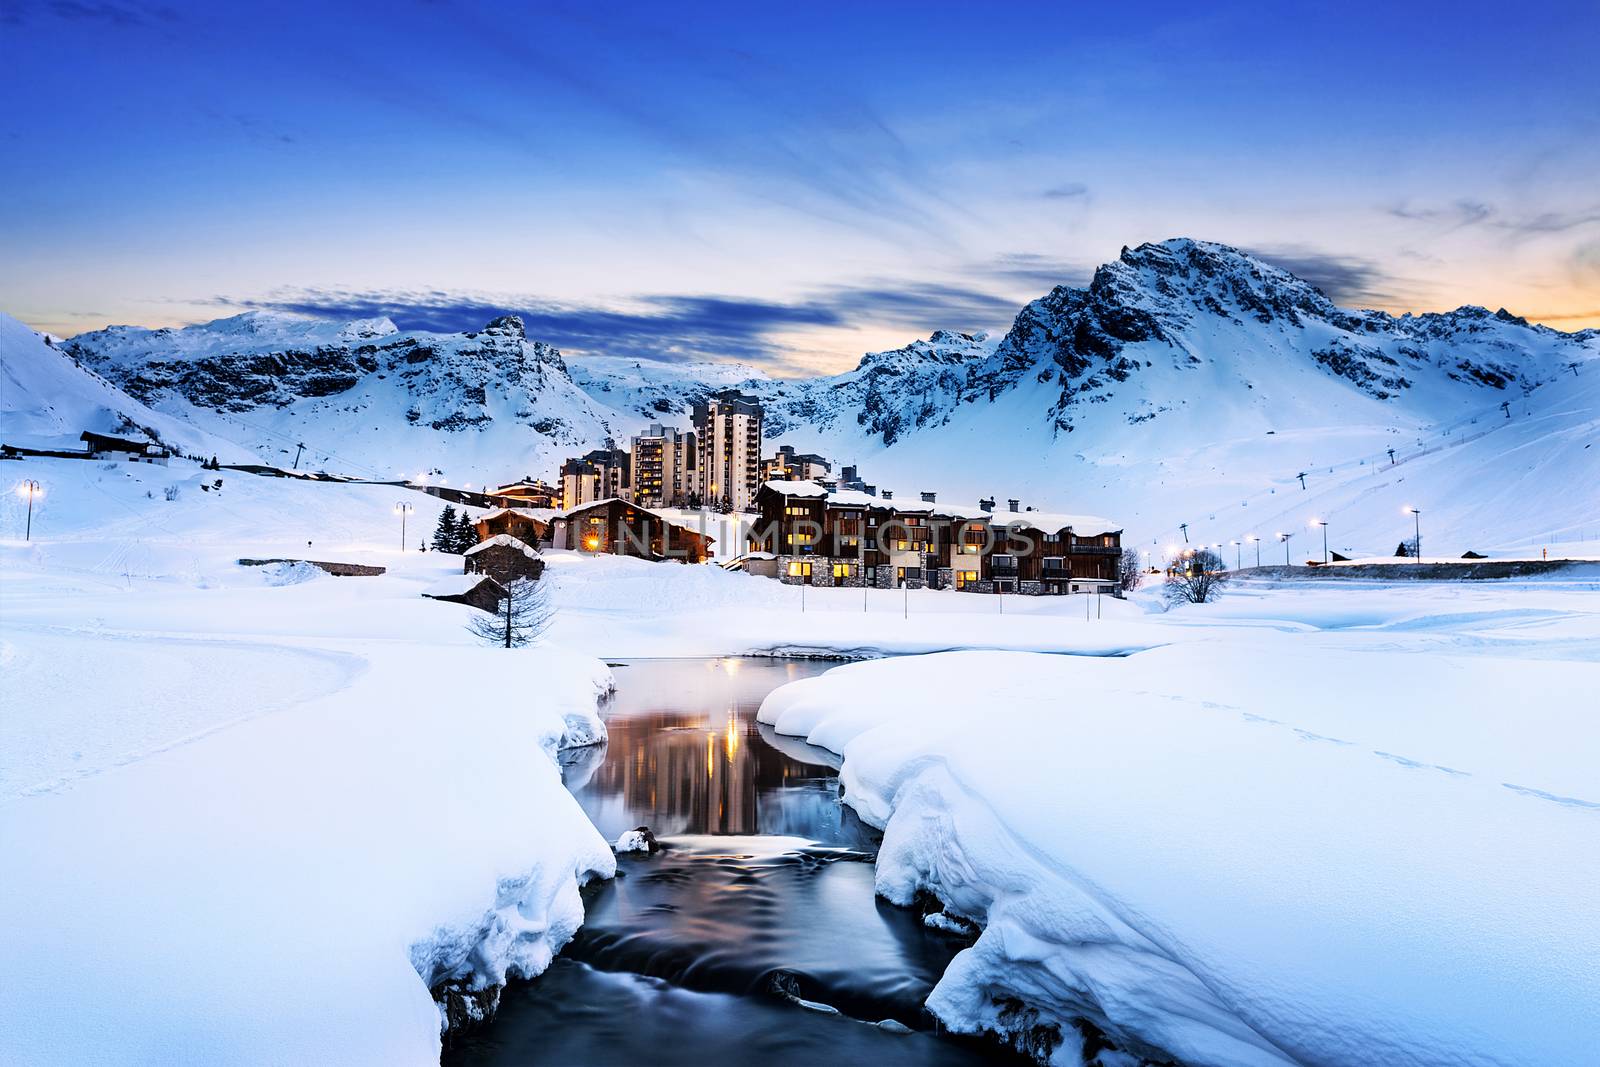 Evening landscape and ski resort in French Alps,Tignes, Tarentaise, France 